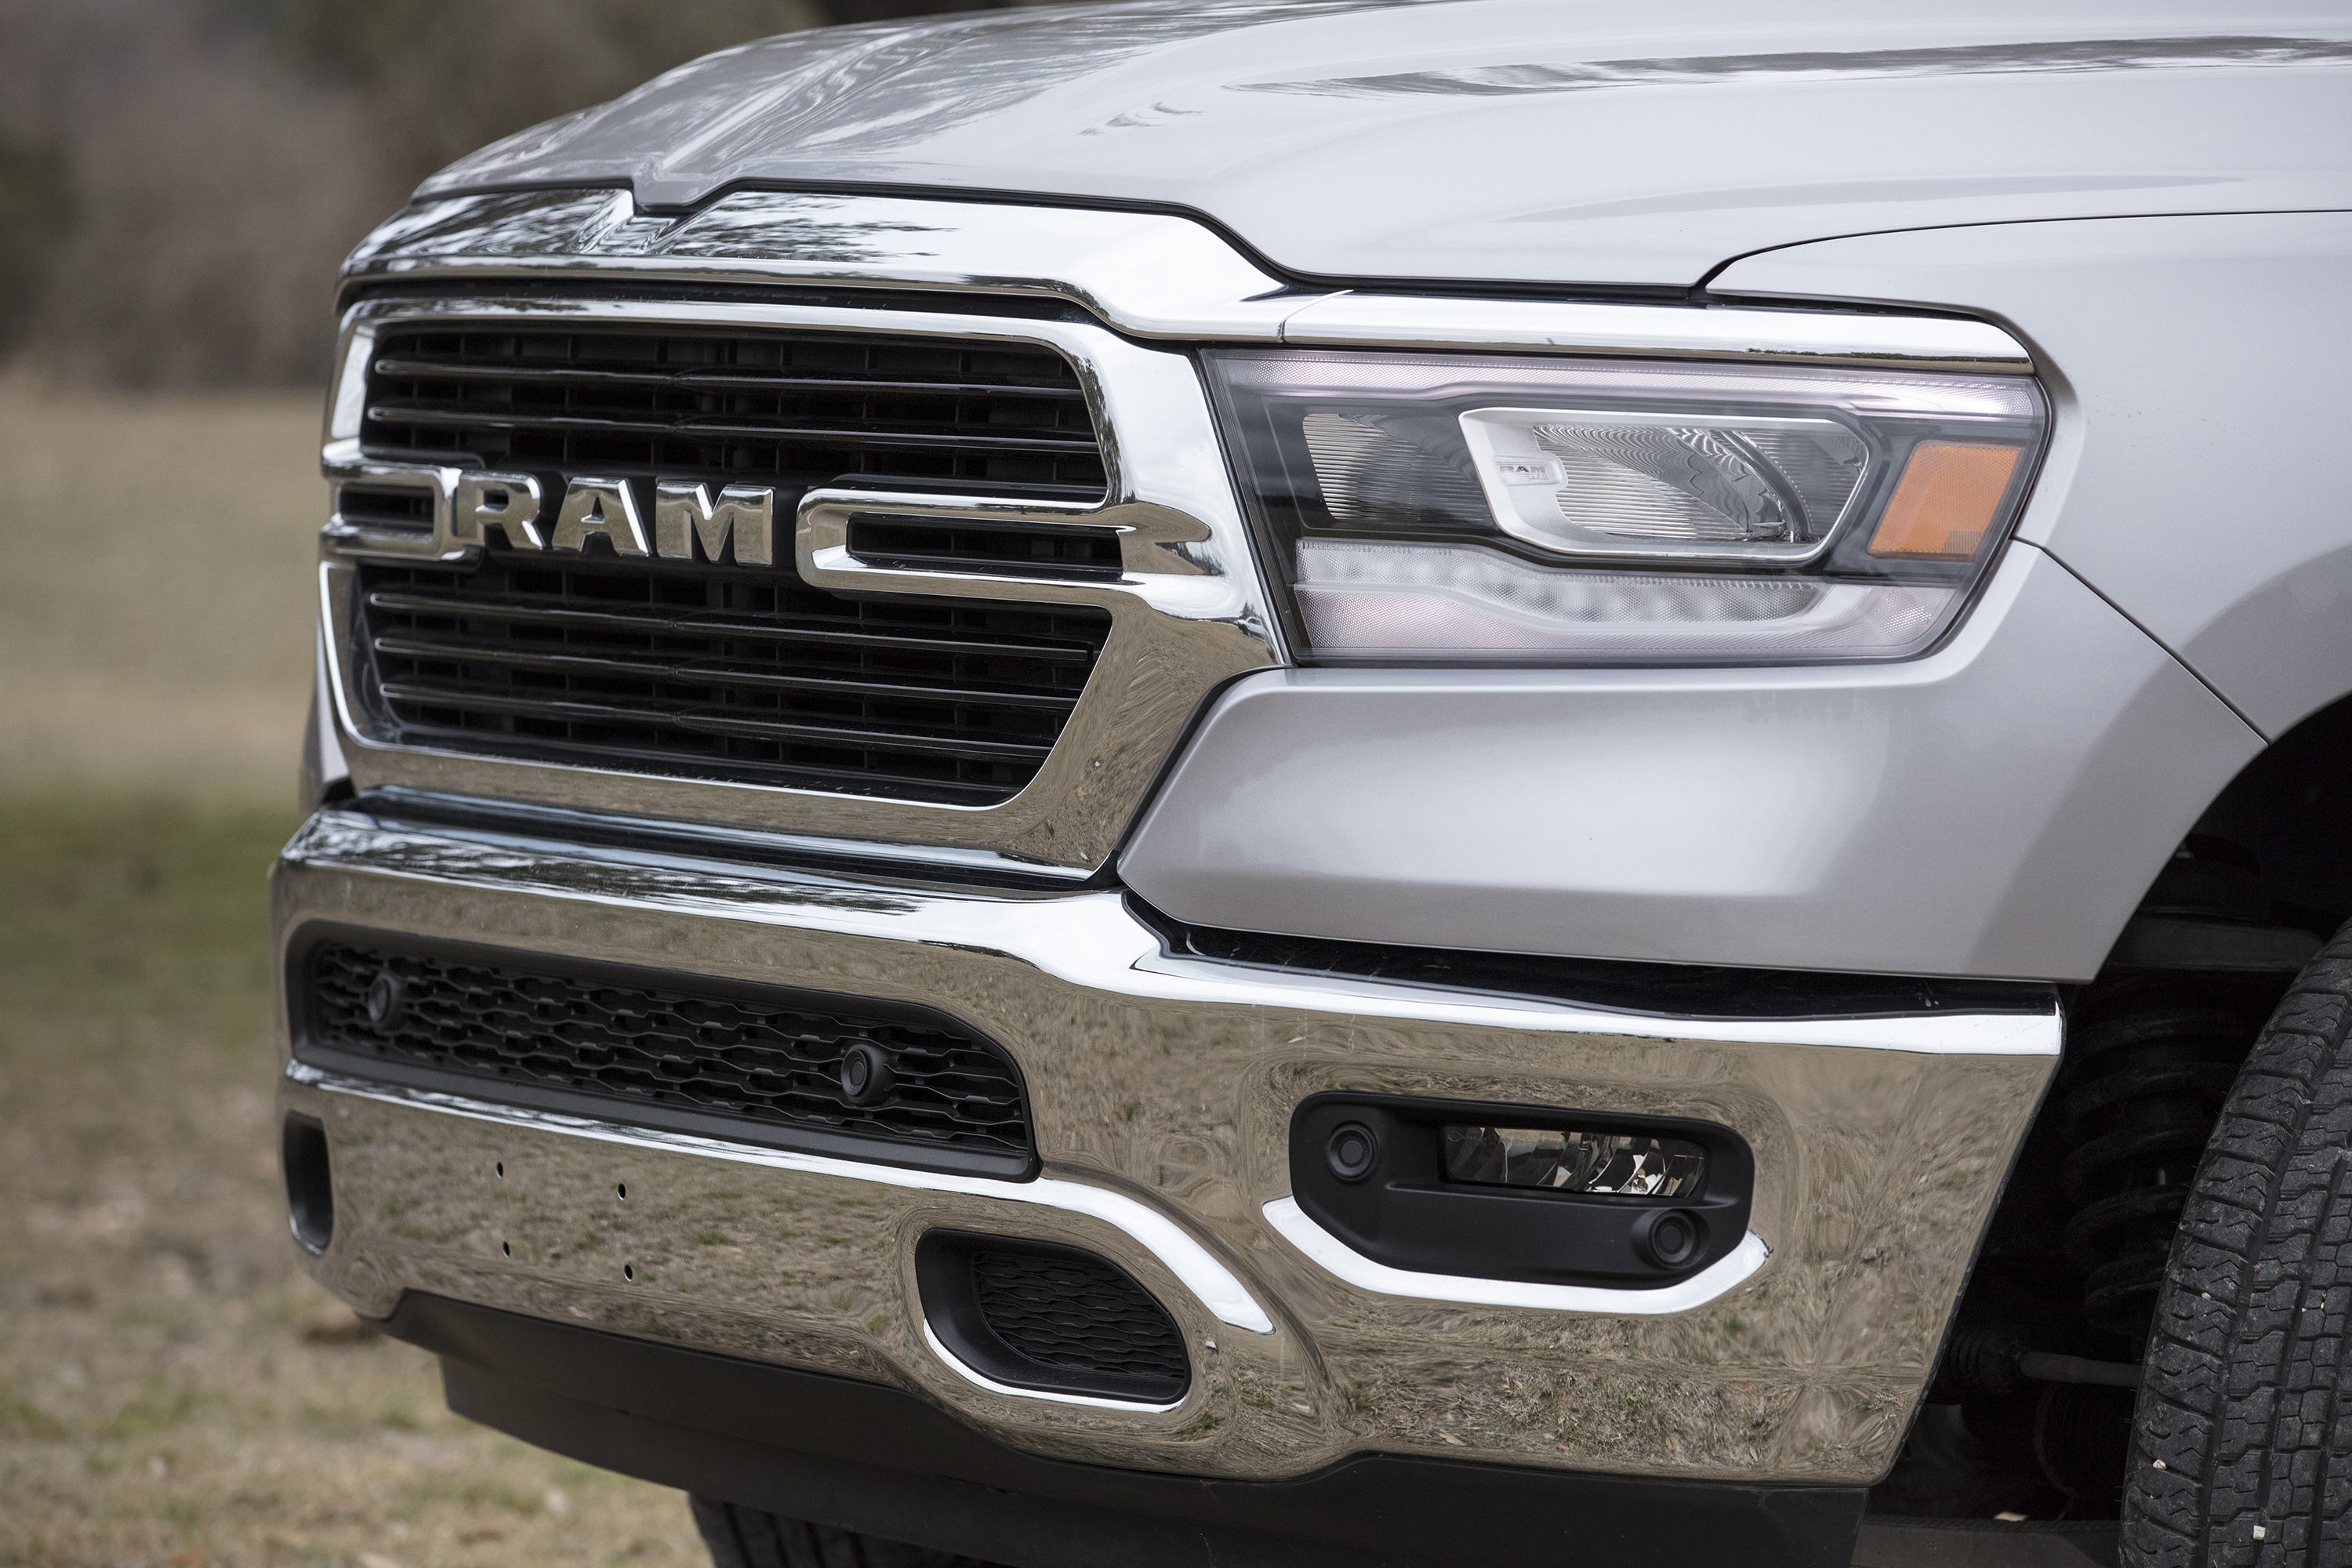 The automaker moved 206,083 vehicles in June, up 14% from a year ago, largely thanks to sales of Ram pickups, which had the highest monthly sales since the truck brand was severed from Dodge in 2009.